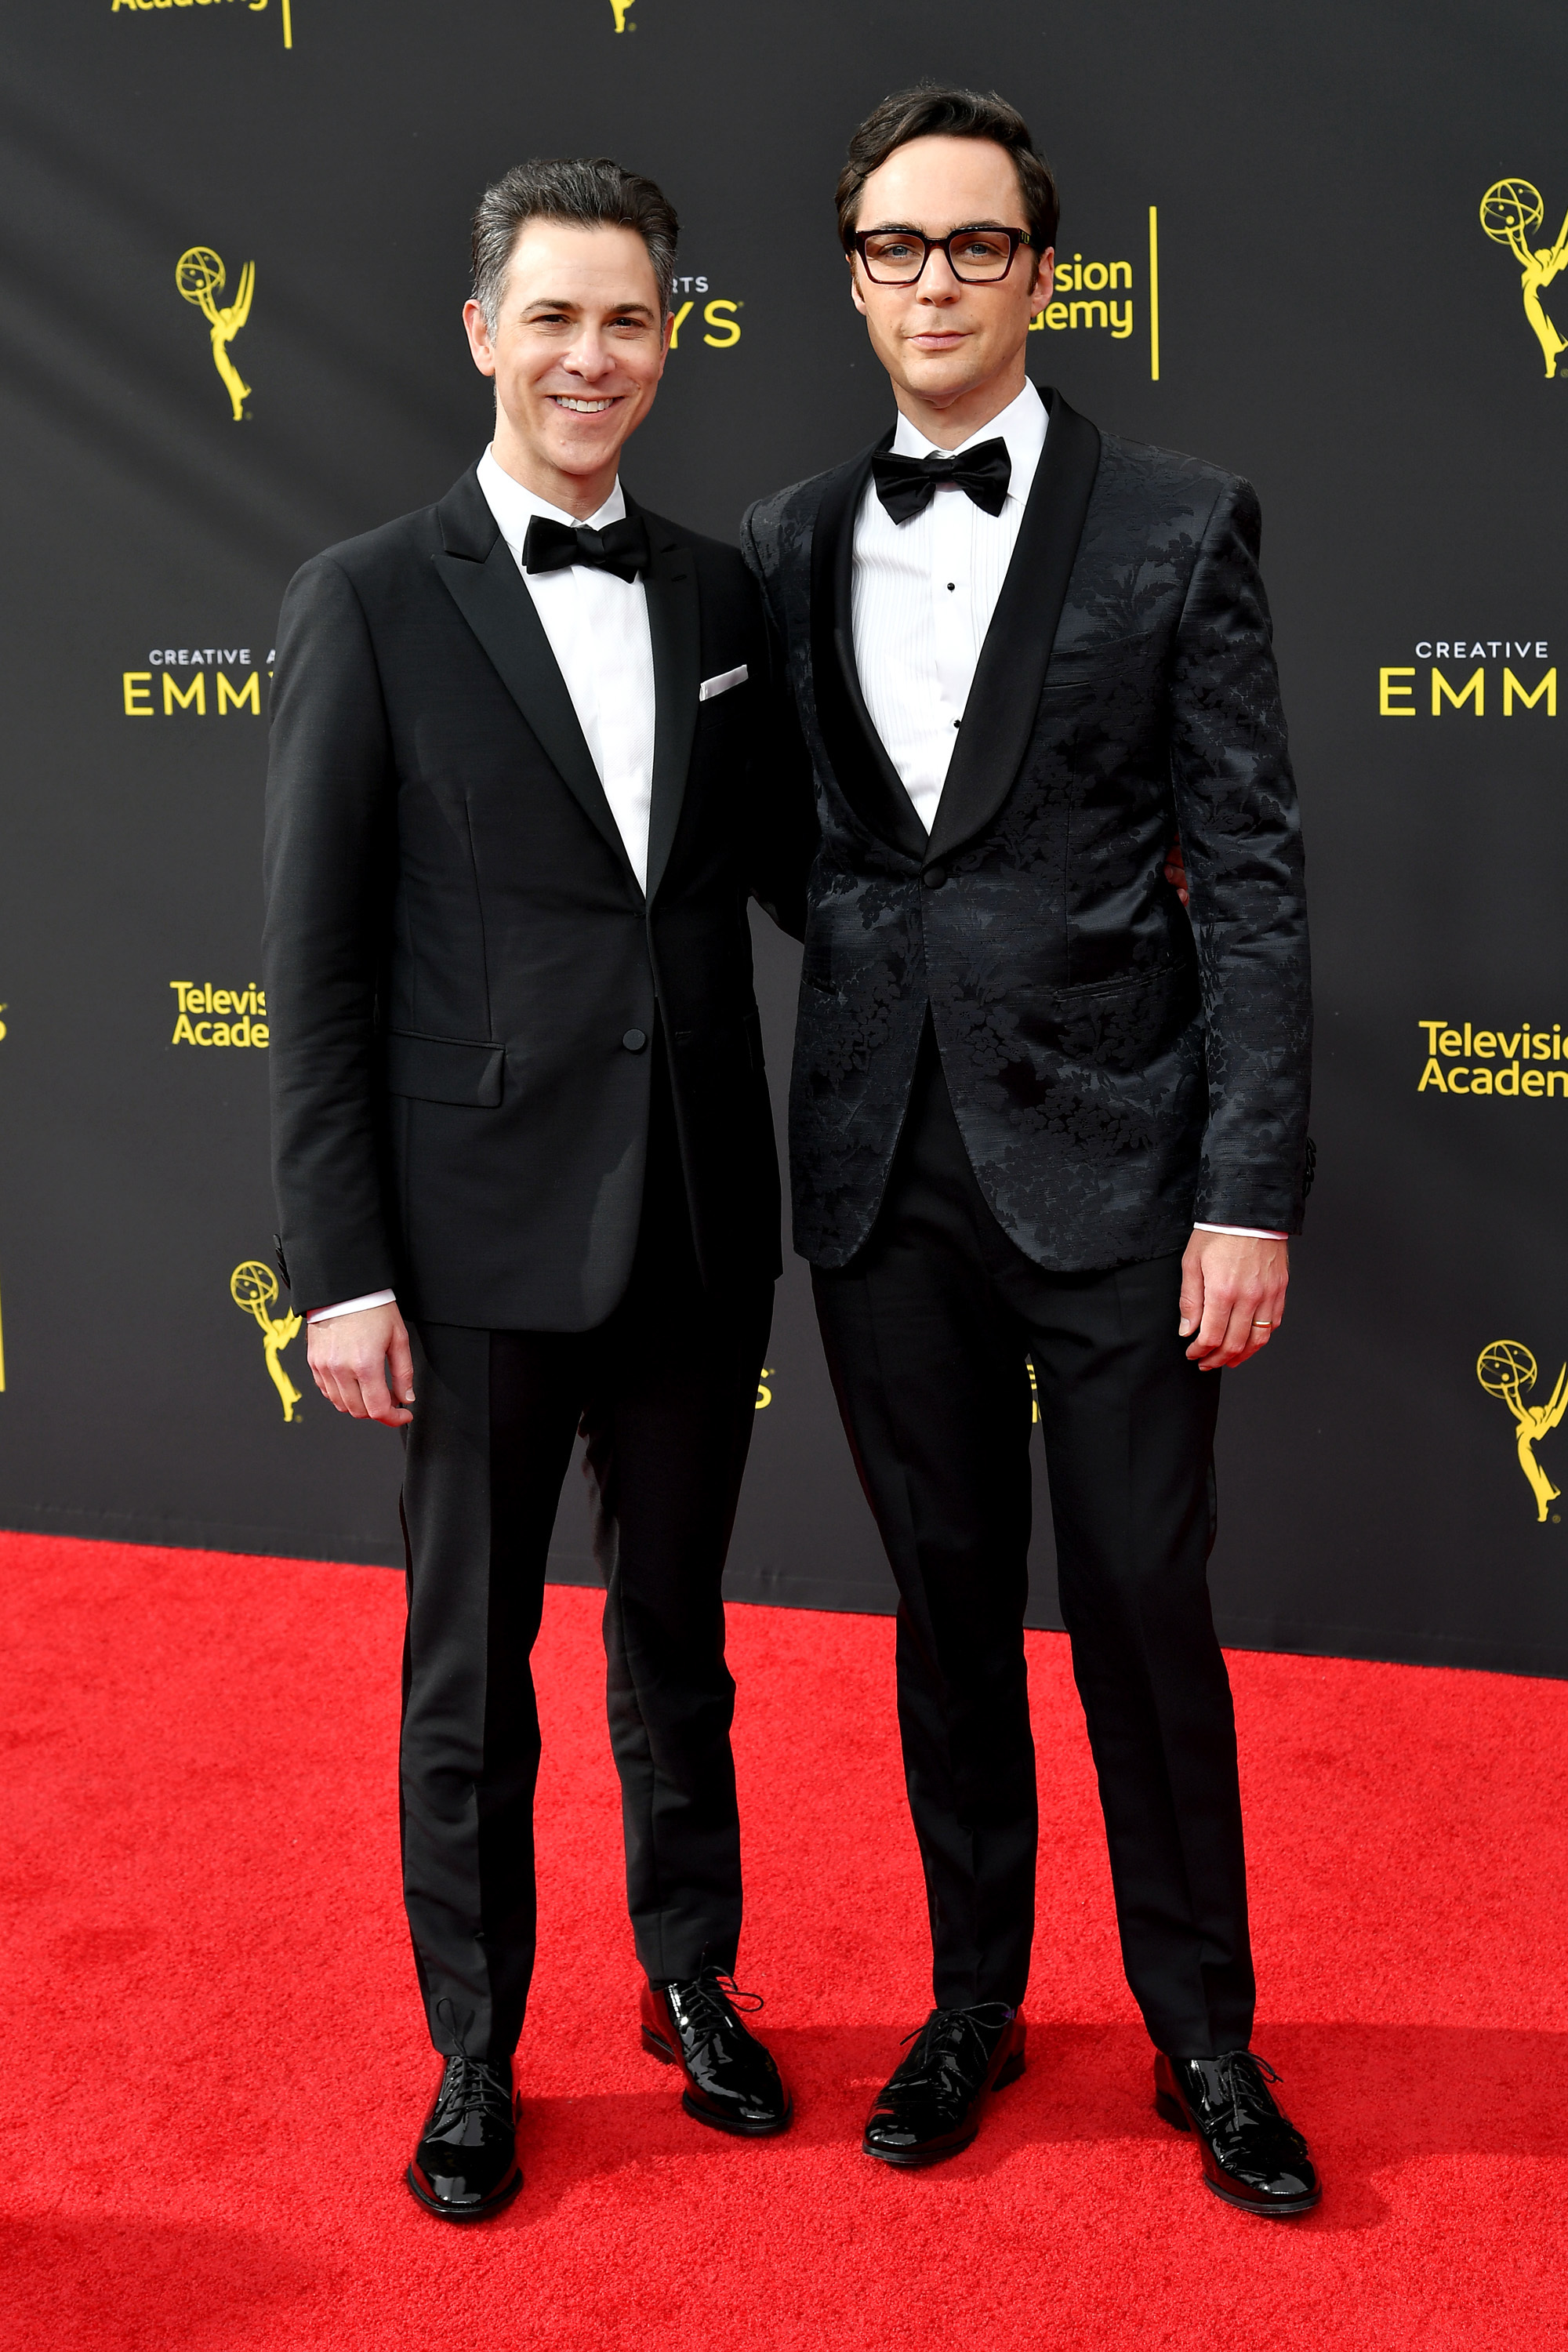 <p>"The Big Bang Theory" star <a href="https://www.wonderwall.com/celebrity/profiles/overview/jim-parsons-1486.article">Jim Parsons</a> and graphic designer Todd Spiewak have been together for 15 years -- and they owe it all to two friends who set them up on a blind date. "What's funny is they went out with us on the date, which was really smart, 'cause it felt very social and it felt very good and we were able to just kind of really just be relaxed with it," Jim told <a href="https://www.wonderwall.com/celebrity/profiles/overview/andy-cohen-1524.article">Andy Cohen</a> on Bravo's "Watch What Happens Live" in May 2017. "We were planning the next date by the end of the night." These days, Jim -- who <a href="http://www.wonderwall.com/celebrity/jim-parsons-weds-todd-spiewak-new-york-3006652.article">married Todd</a> on May 13, 2017, at New York City's Rainbow Room -- is the highest paid actor on television (along with co-stars <a href="https://www.wonderwall.com/celebrity/profiles/overview/kaley-cuoco-1531.article">Kaley Cuoco</a> and Johnny Galecki). But things were a lot different when he and Todd started their romance. "He had kind of supported me for the first few years of our relationship because he had a normal job and I was working acting jobs and so when I finally was making my own money on a TV show, it was a relief, certainly to me. It was a nice, different balance," Jim told Andy.</p>